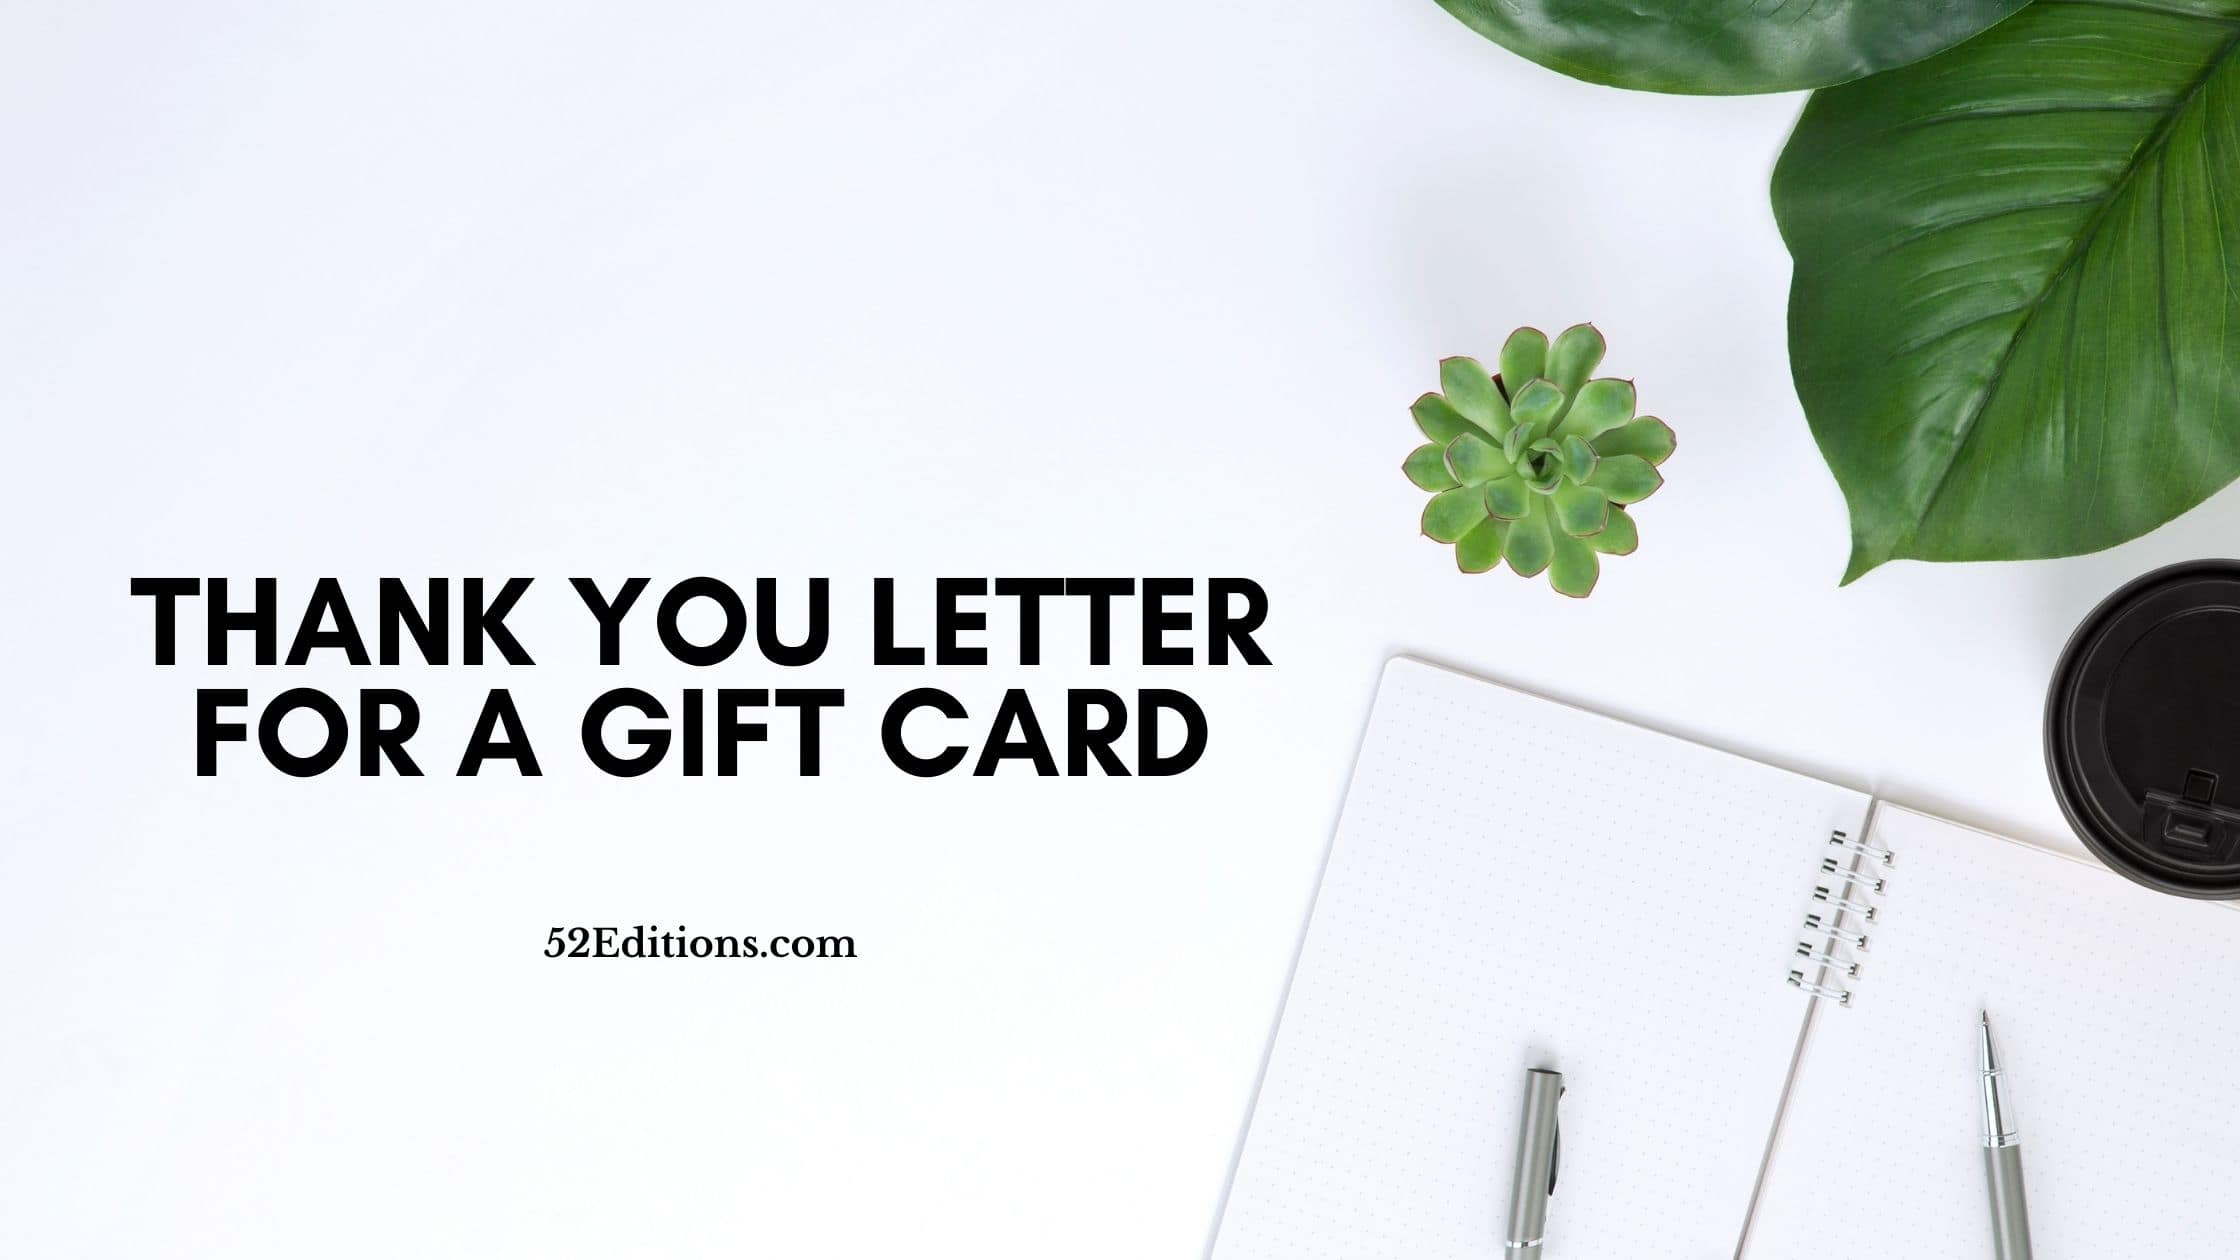 Thank You Letter For A Gift Card Get FREE Letter Templates Print Or